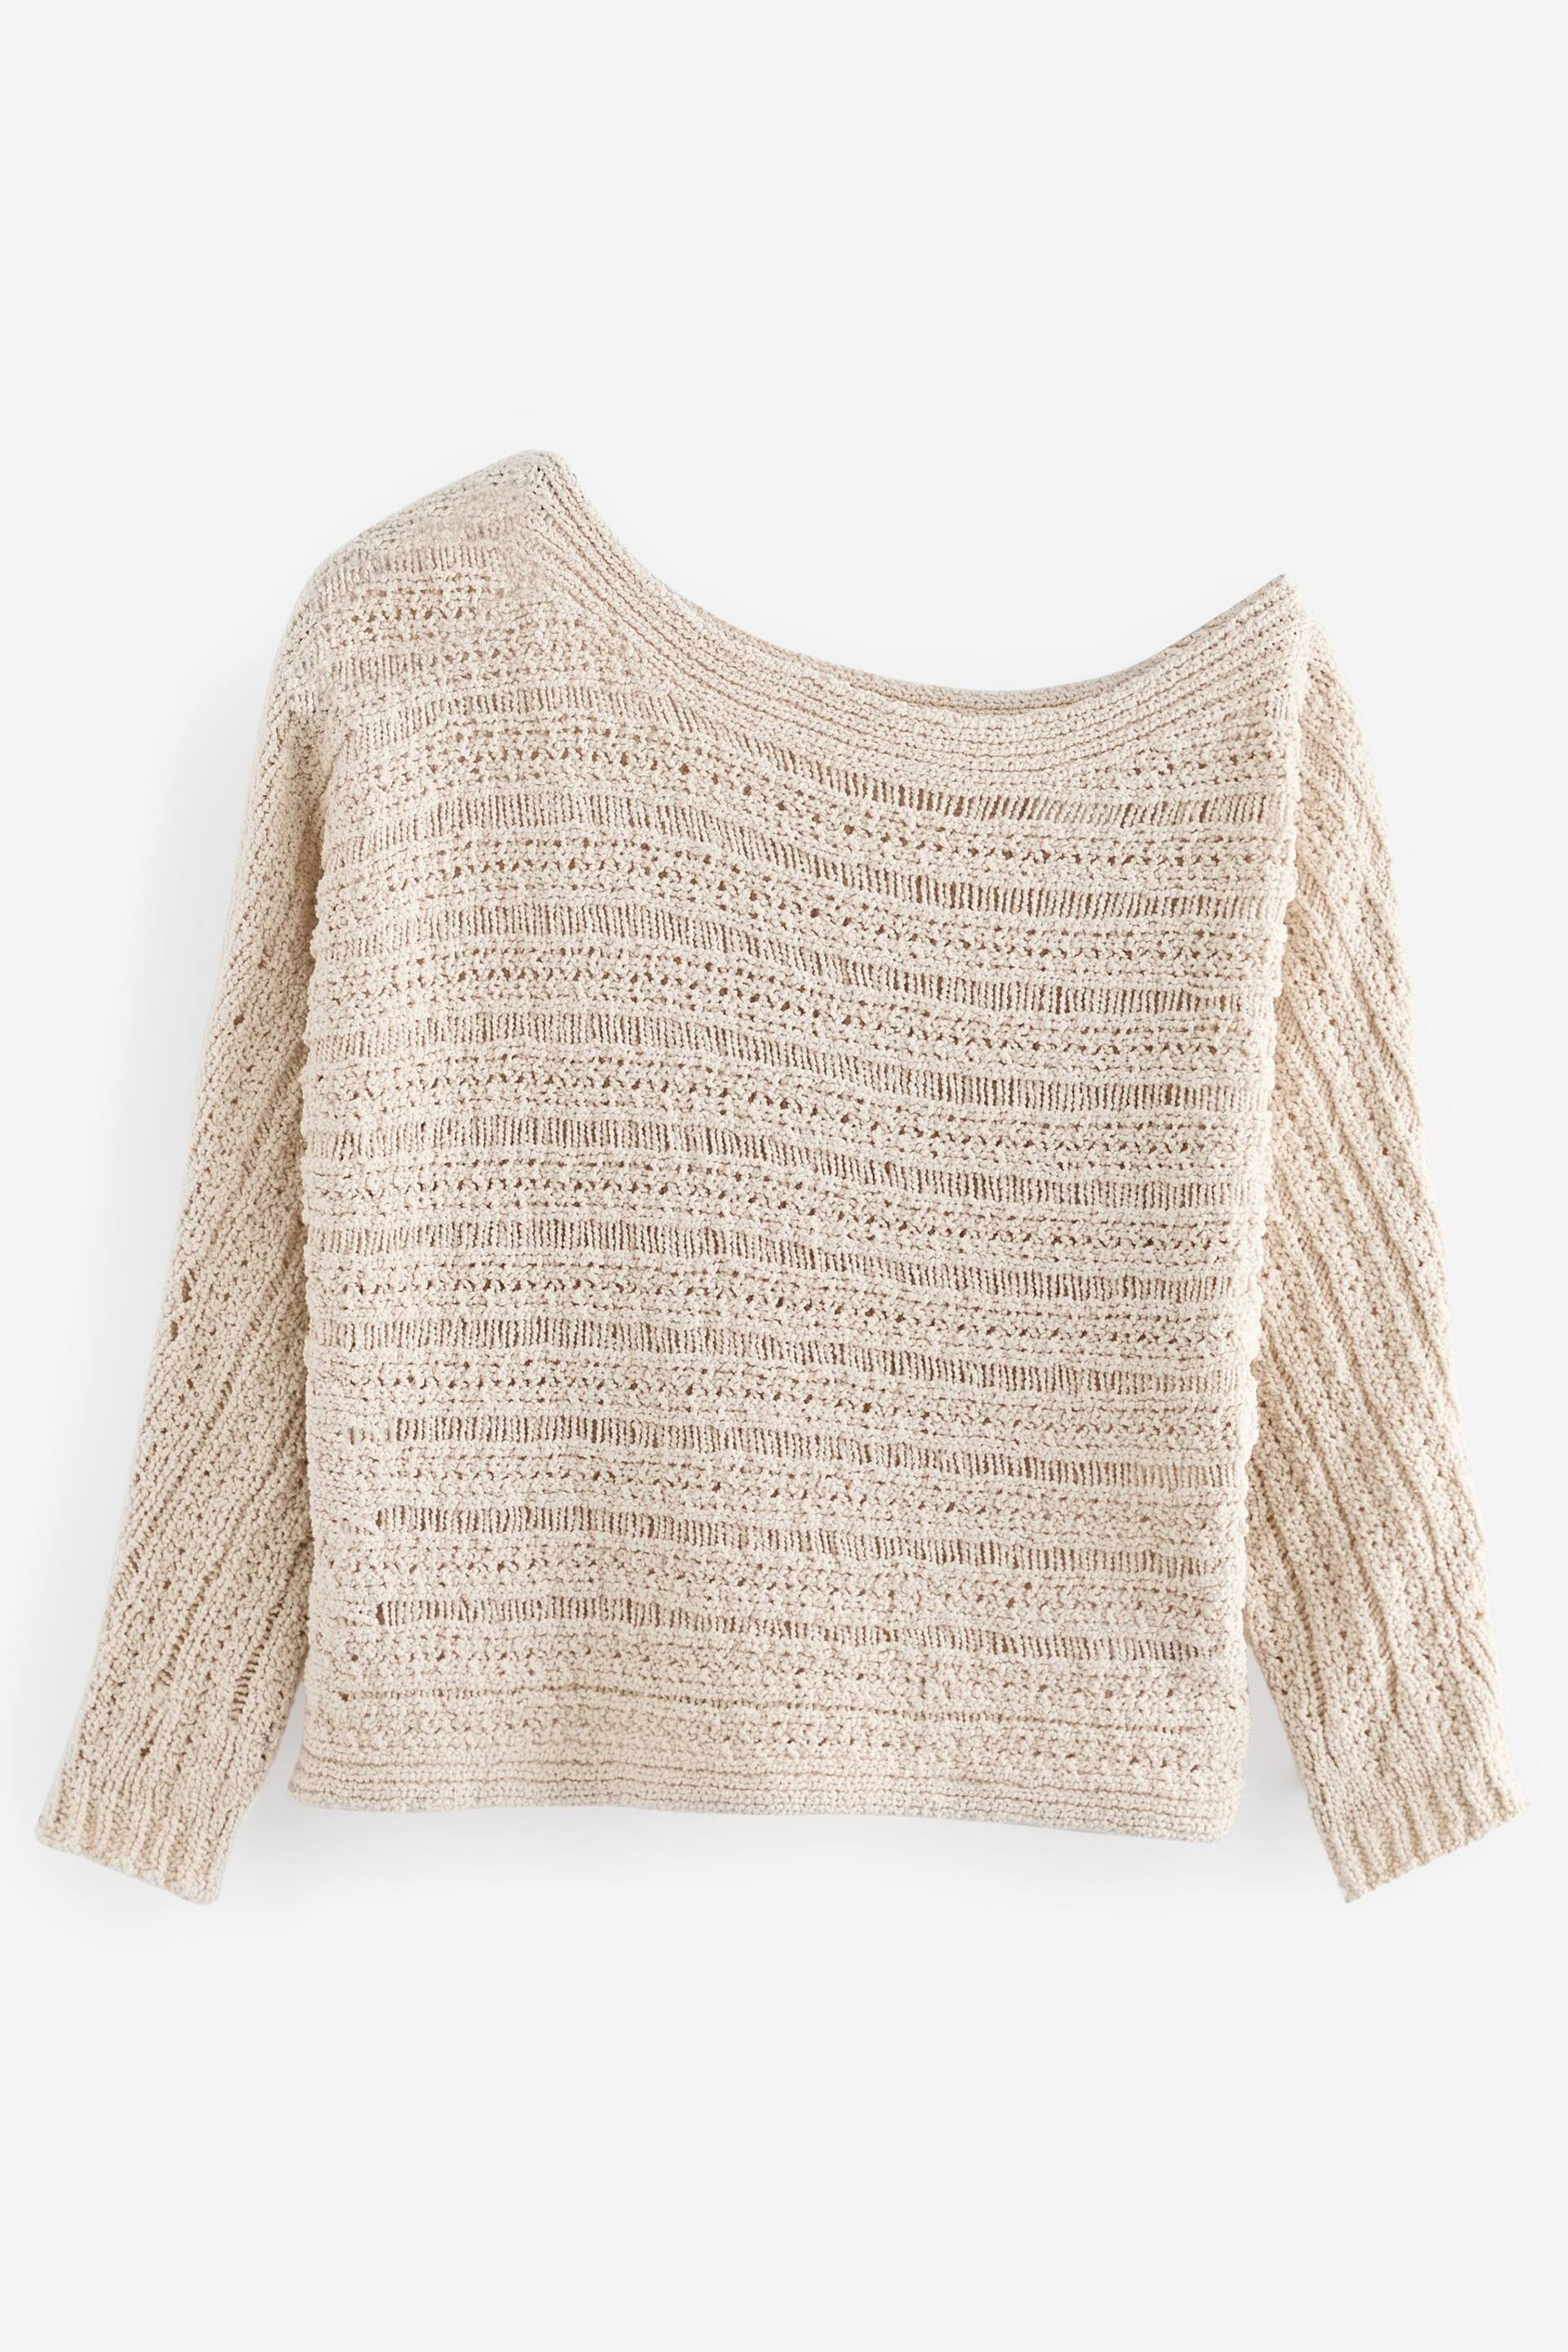 White Knitted Long Sleeve Off The Shoulder Top - Image 5 of 6